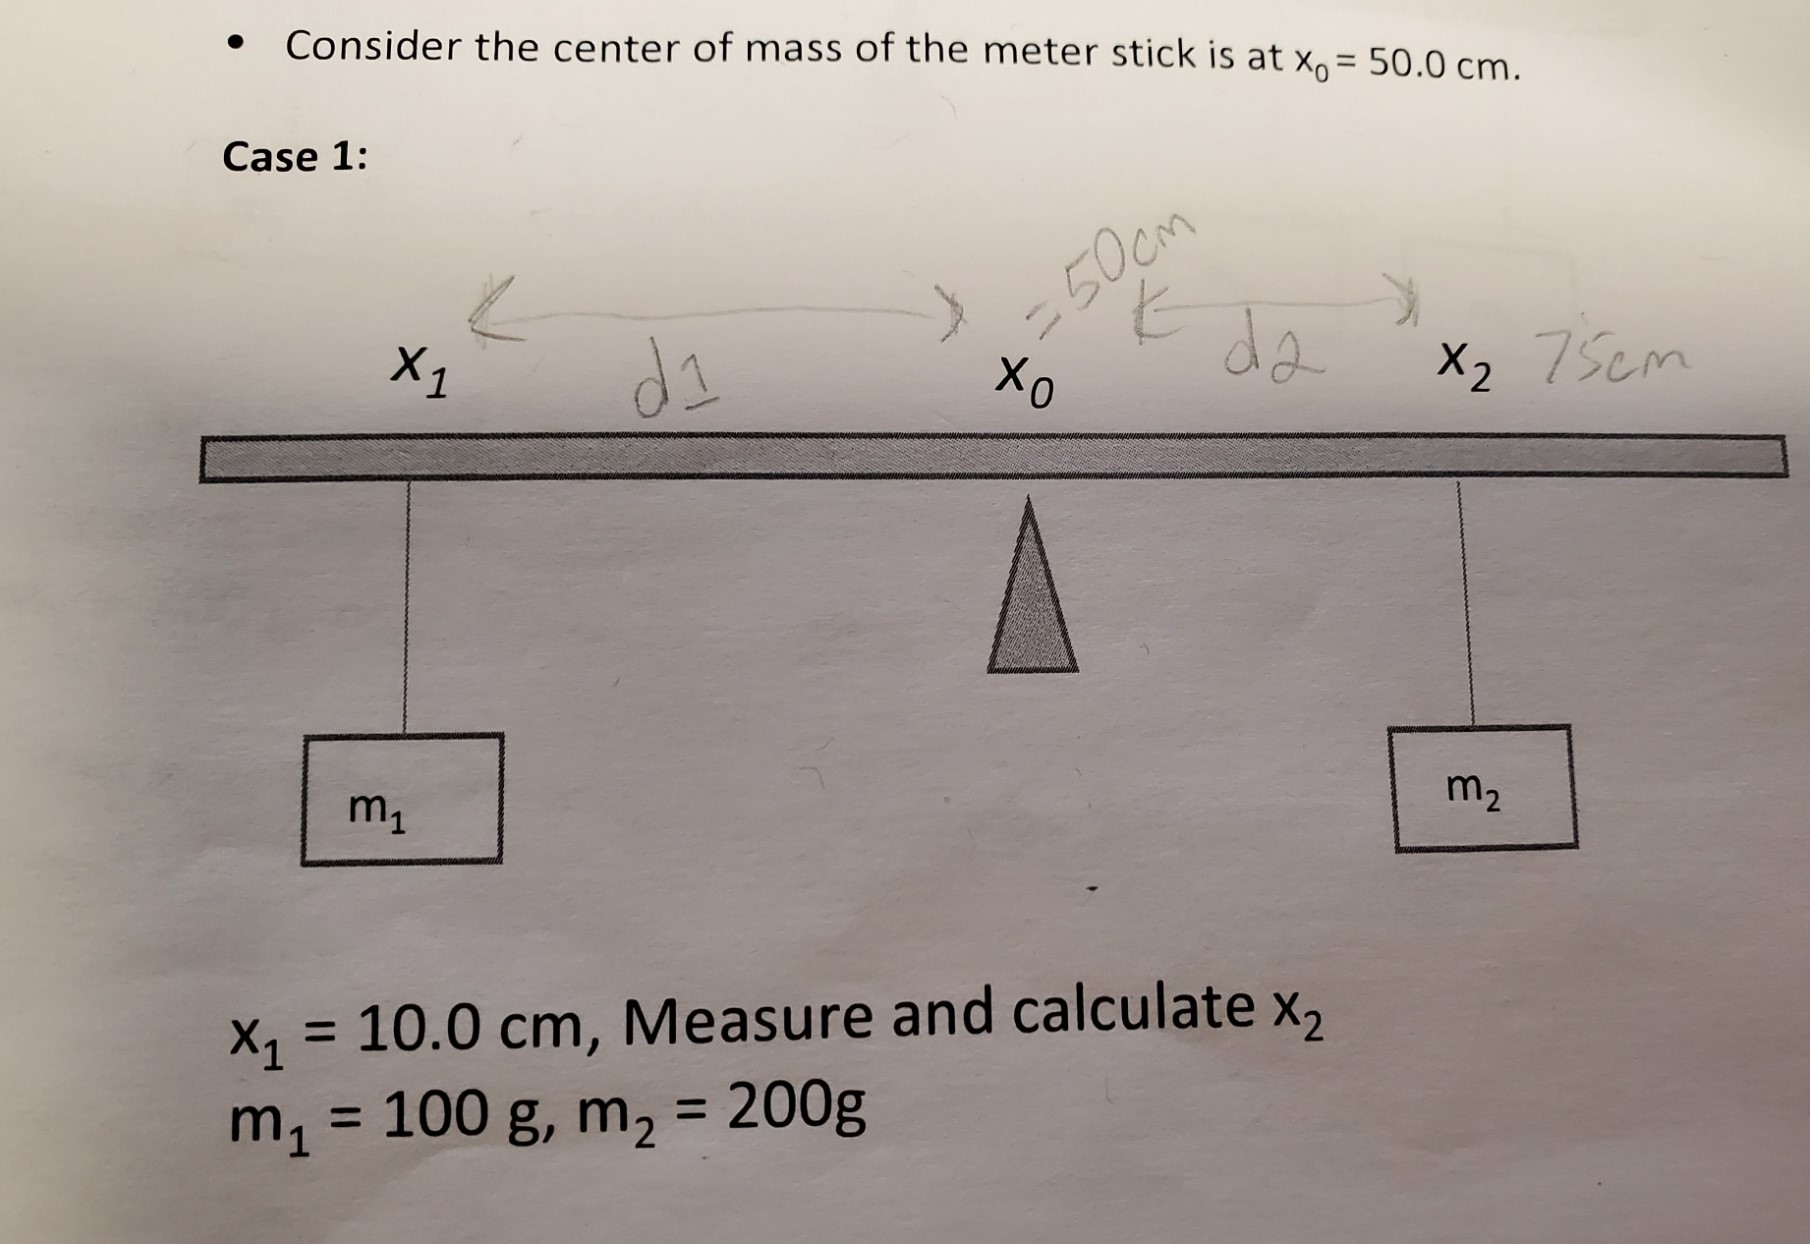 Consider the center of mass of the meter stick is at x= 50.0 cm.
Case 1:
-50cm
da
X1
di
X2 75cm
m1
m2
10.0 cm, Measure and calculate x,
100 g, m2 = 200g
m
X1
